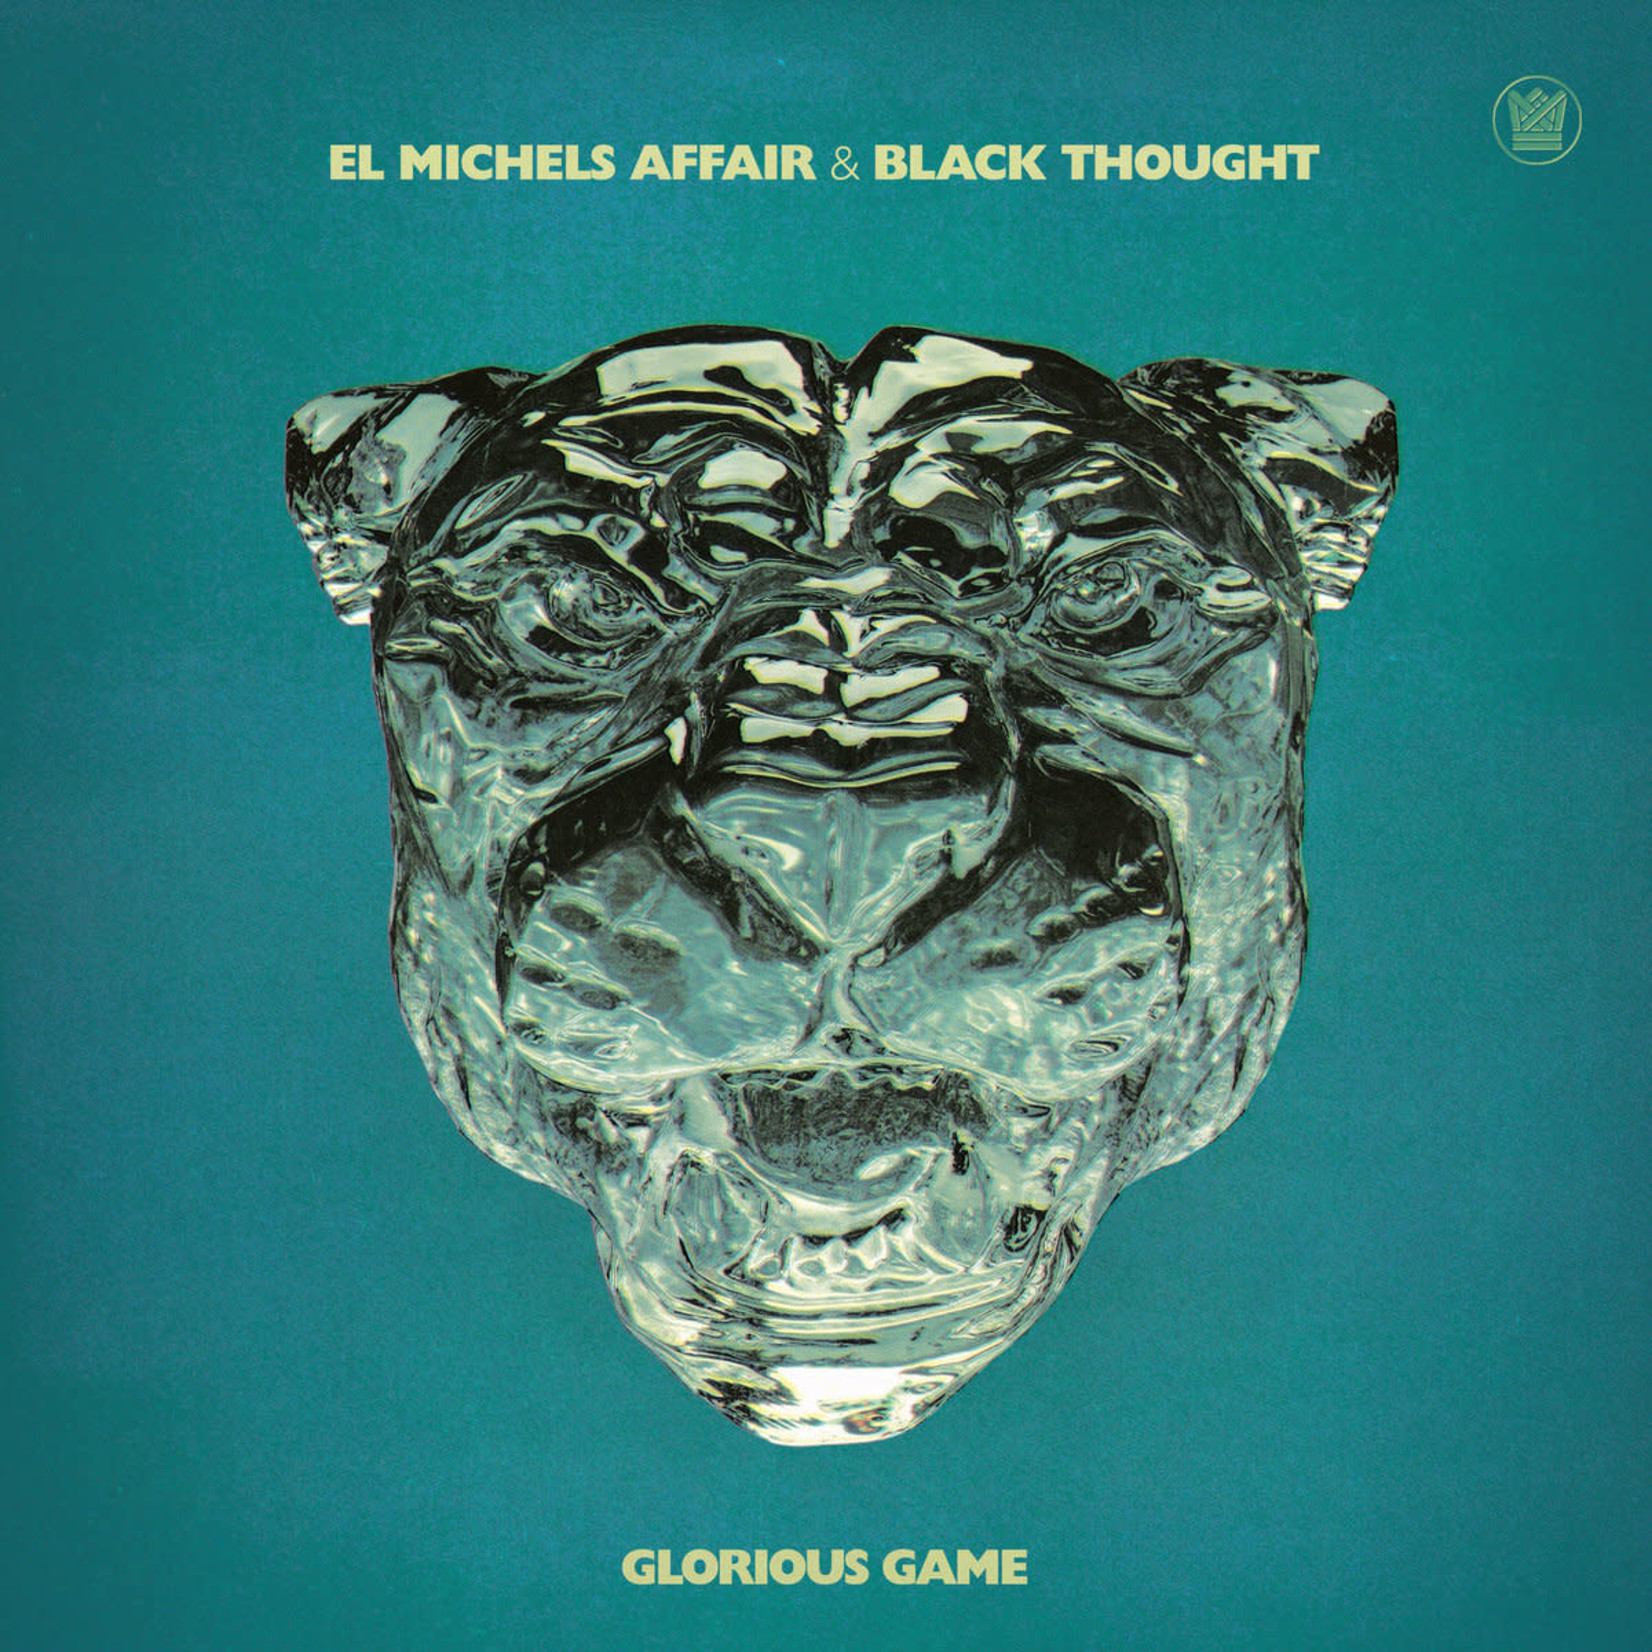 [New] El Michels Affair & Black Thought: Glorious Game (sky high coloured) [BIG CROWN]